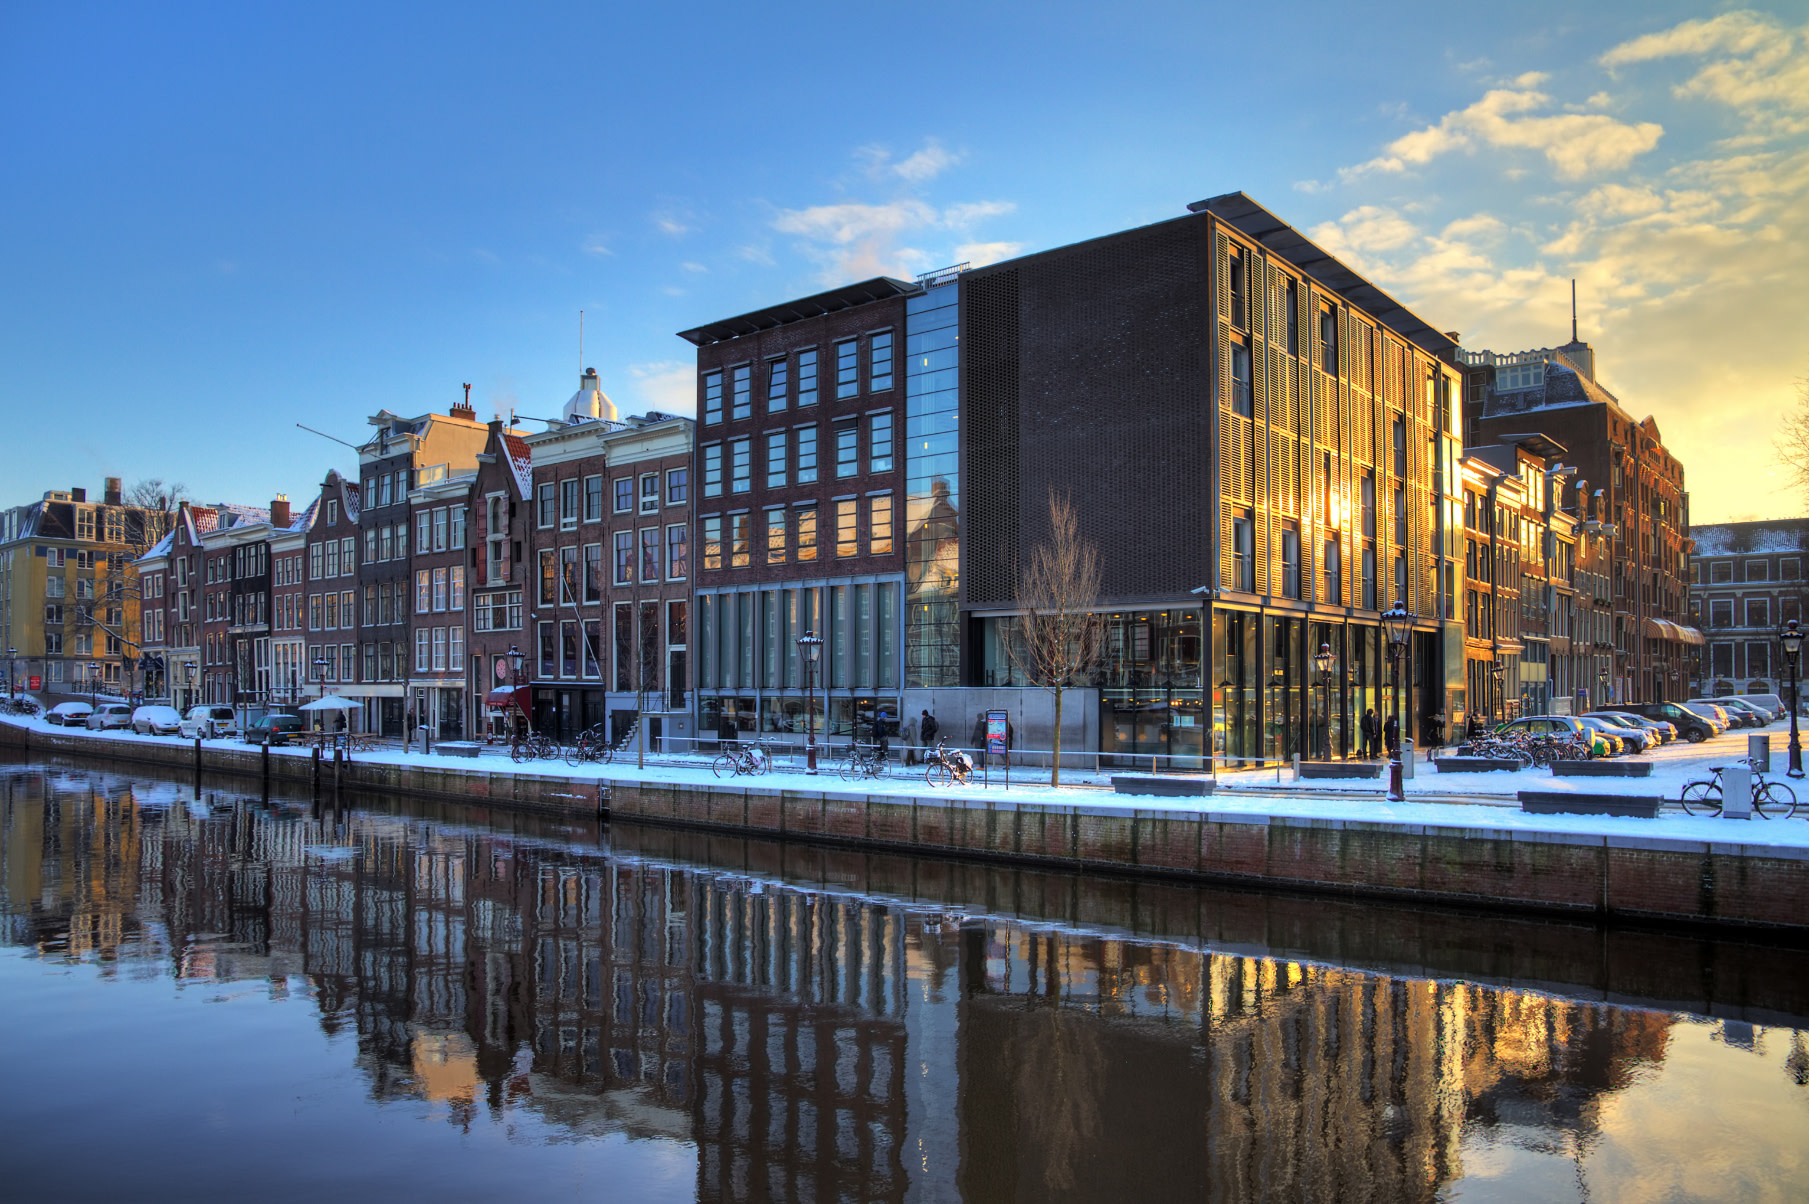 The Anne Frank House and Holocaust Museum in Amsterdam, the most popular site on WJT (Credit: Dennis van de Water via Shutterstock)